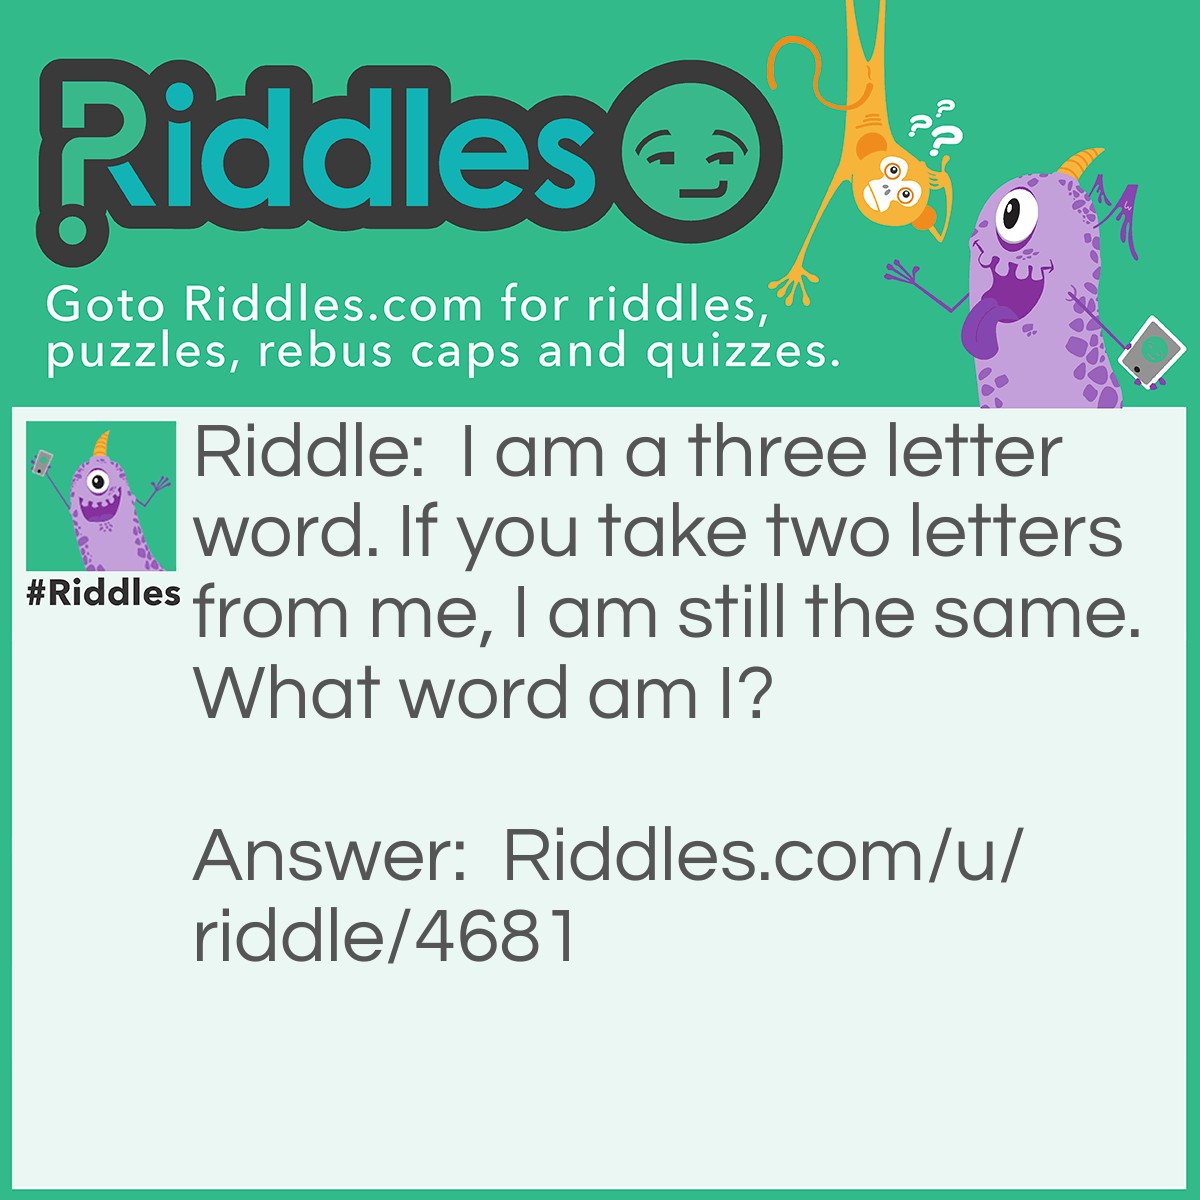 Riddle: I am a three letter word. If you take two letters from me, I am still the same. What word am I? Answer: The word pea.